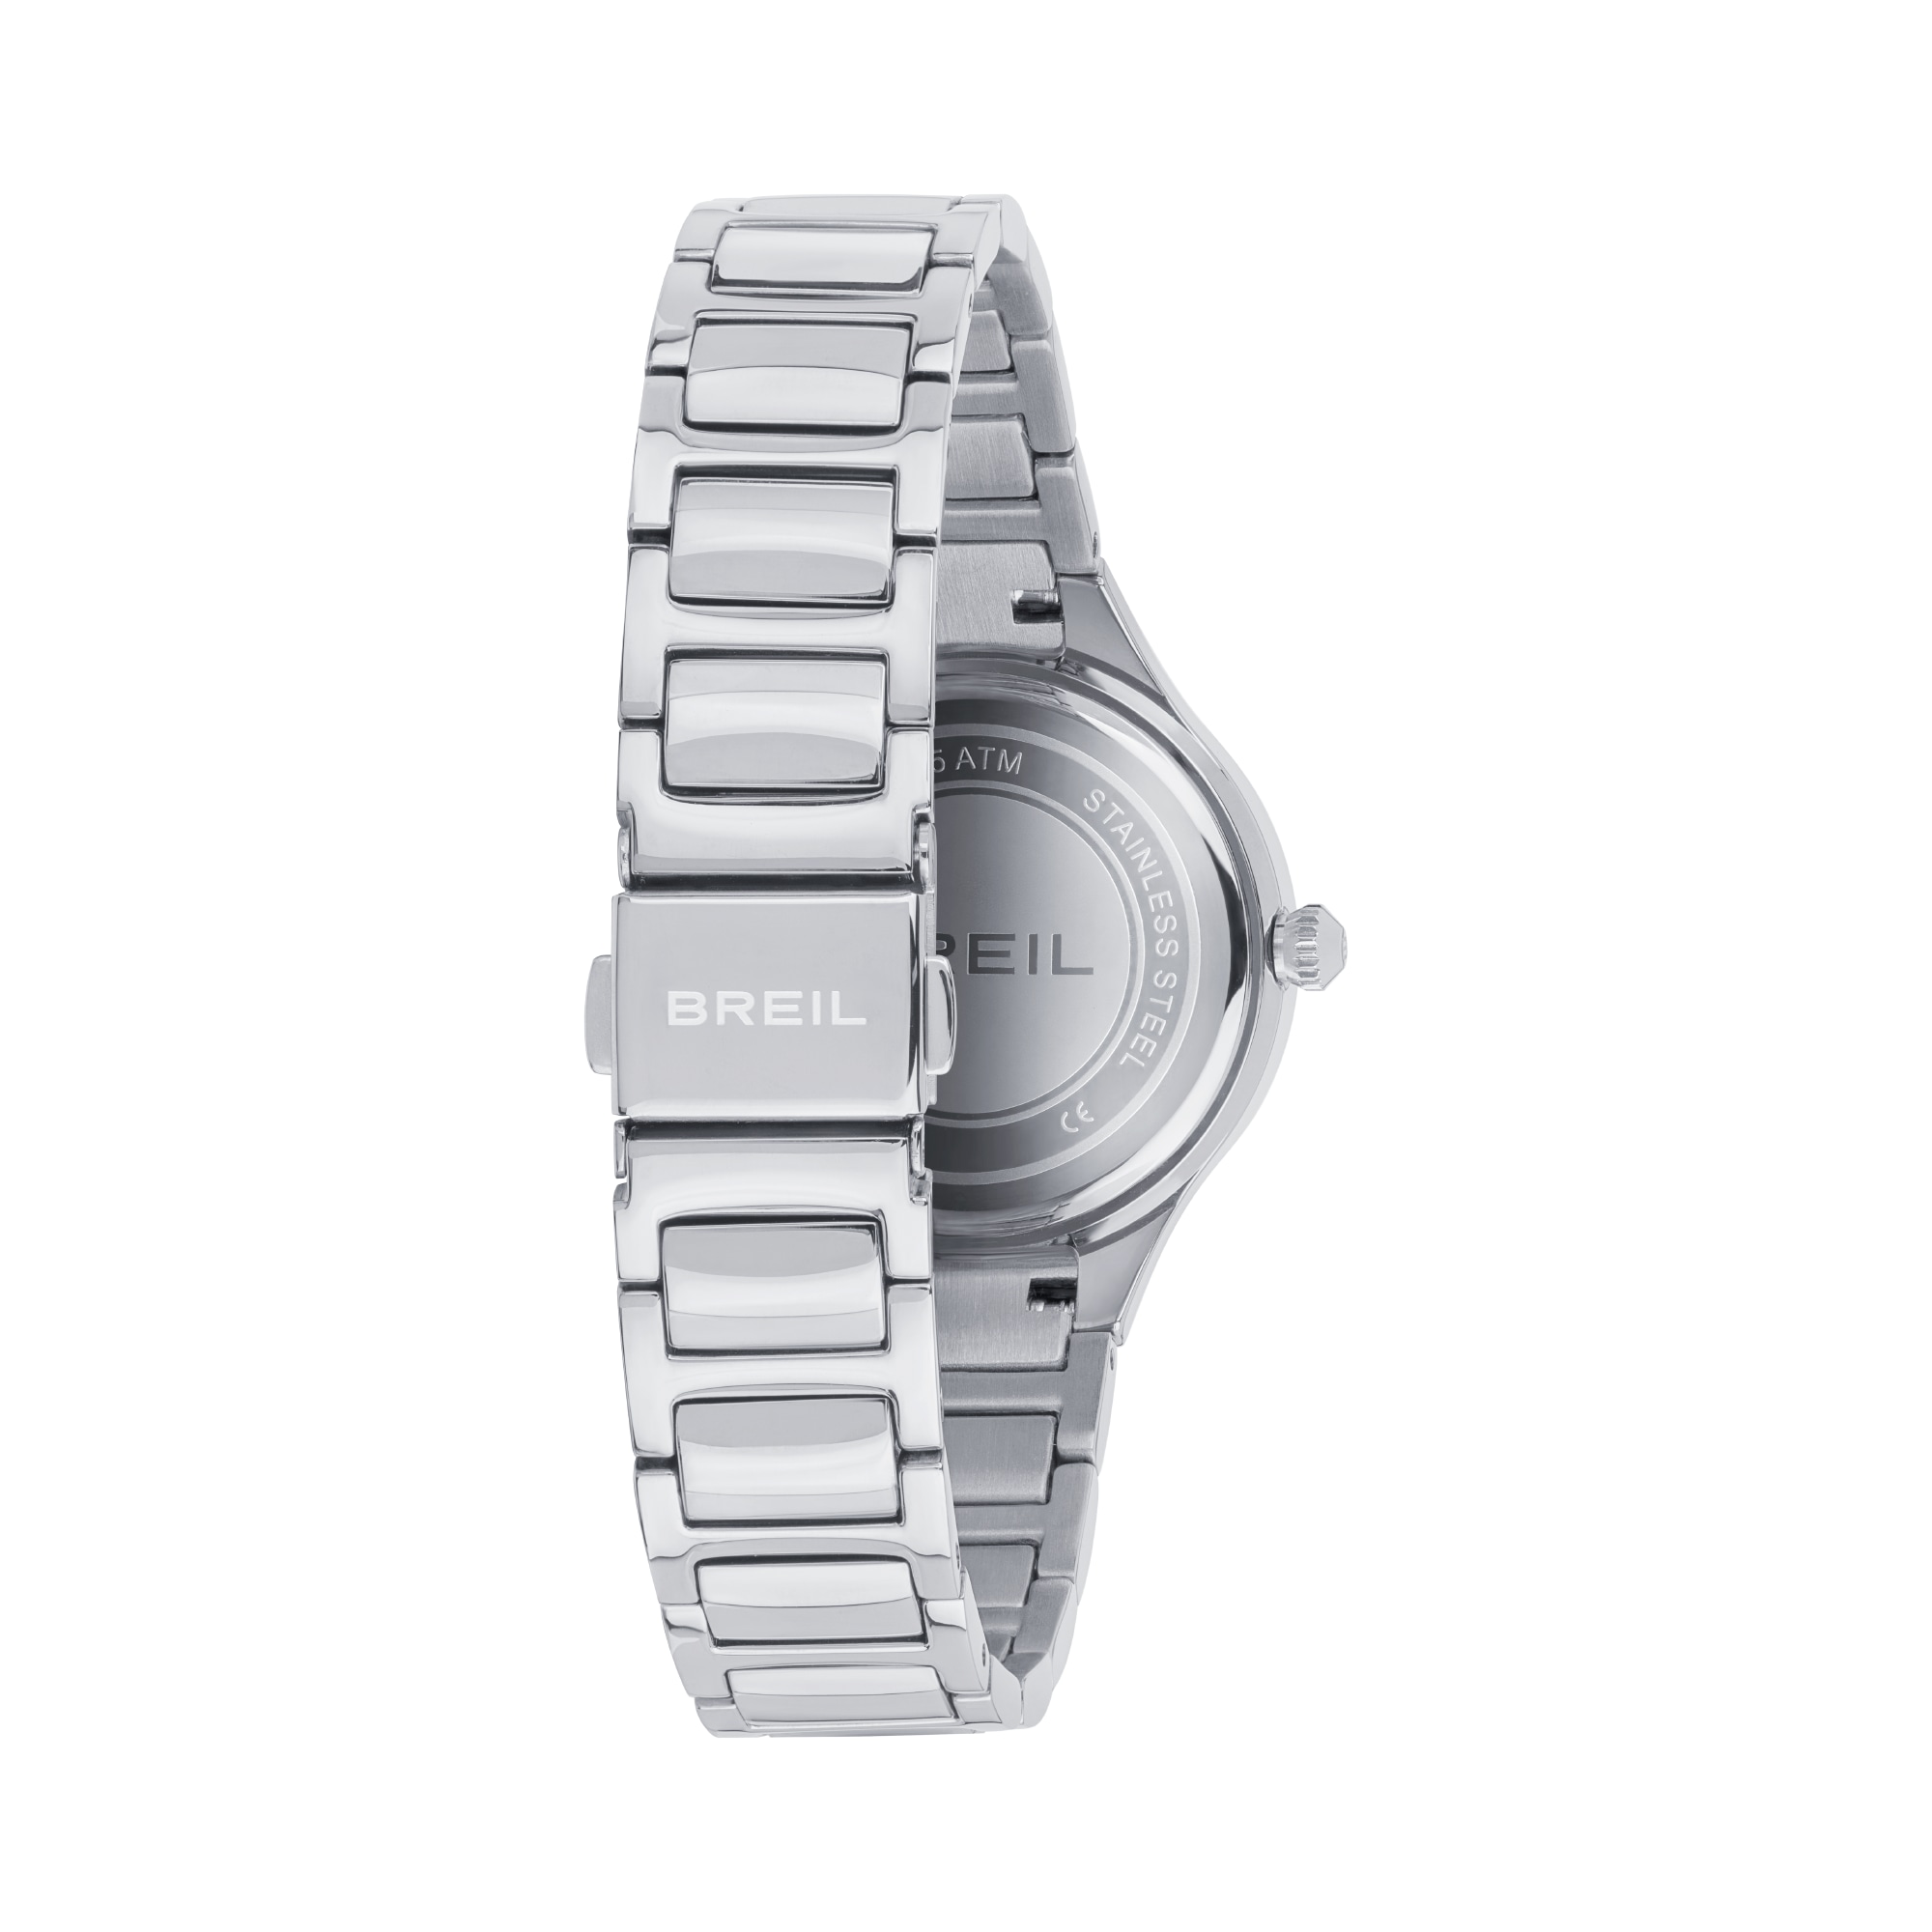 SHEER - SOLO TEMPO LADY 32 MM - 3 - TW1996 | Breil